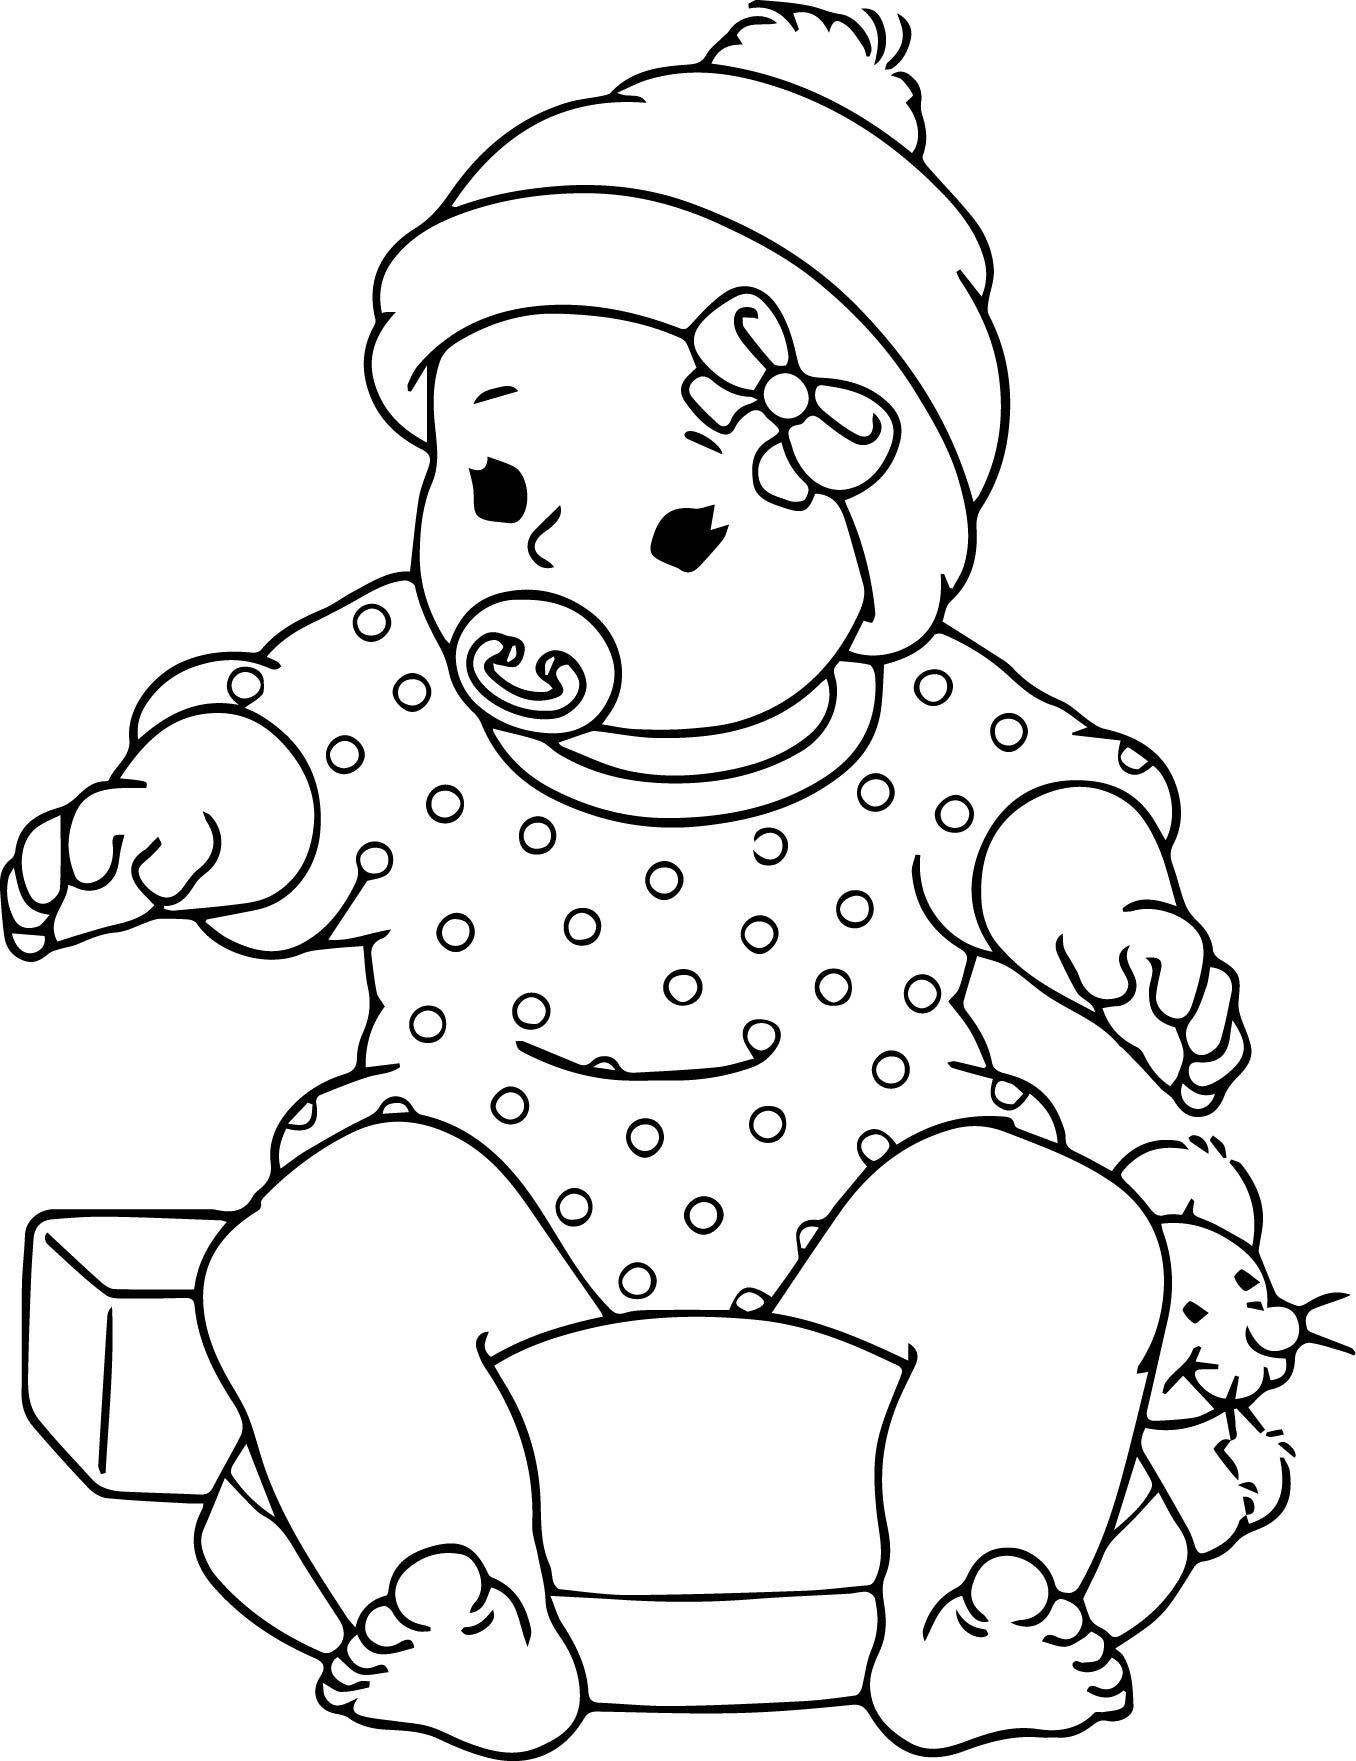 Baby Doll Coloring Page
 Free Printable Baby Doll Coloring Pages Throughout Inside